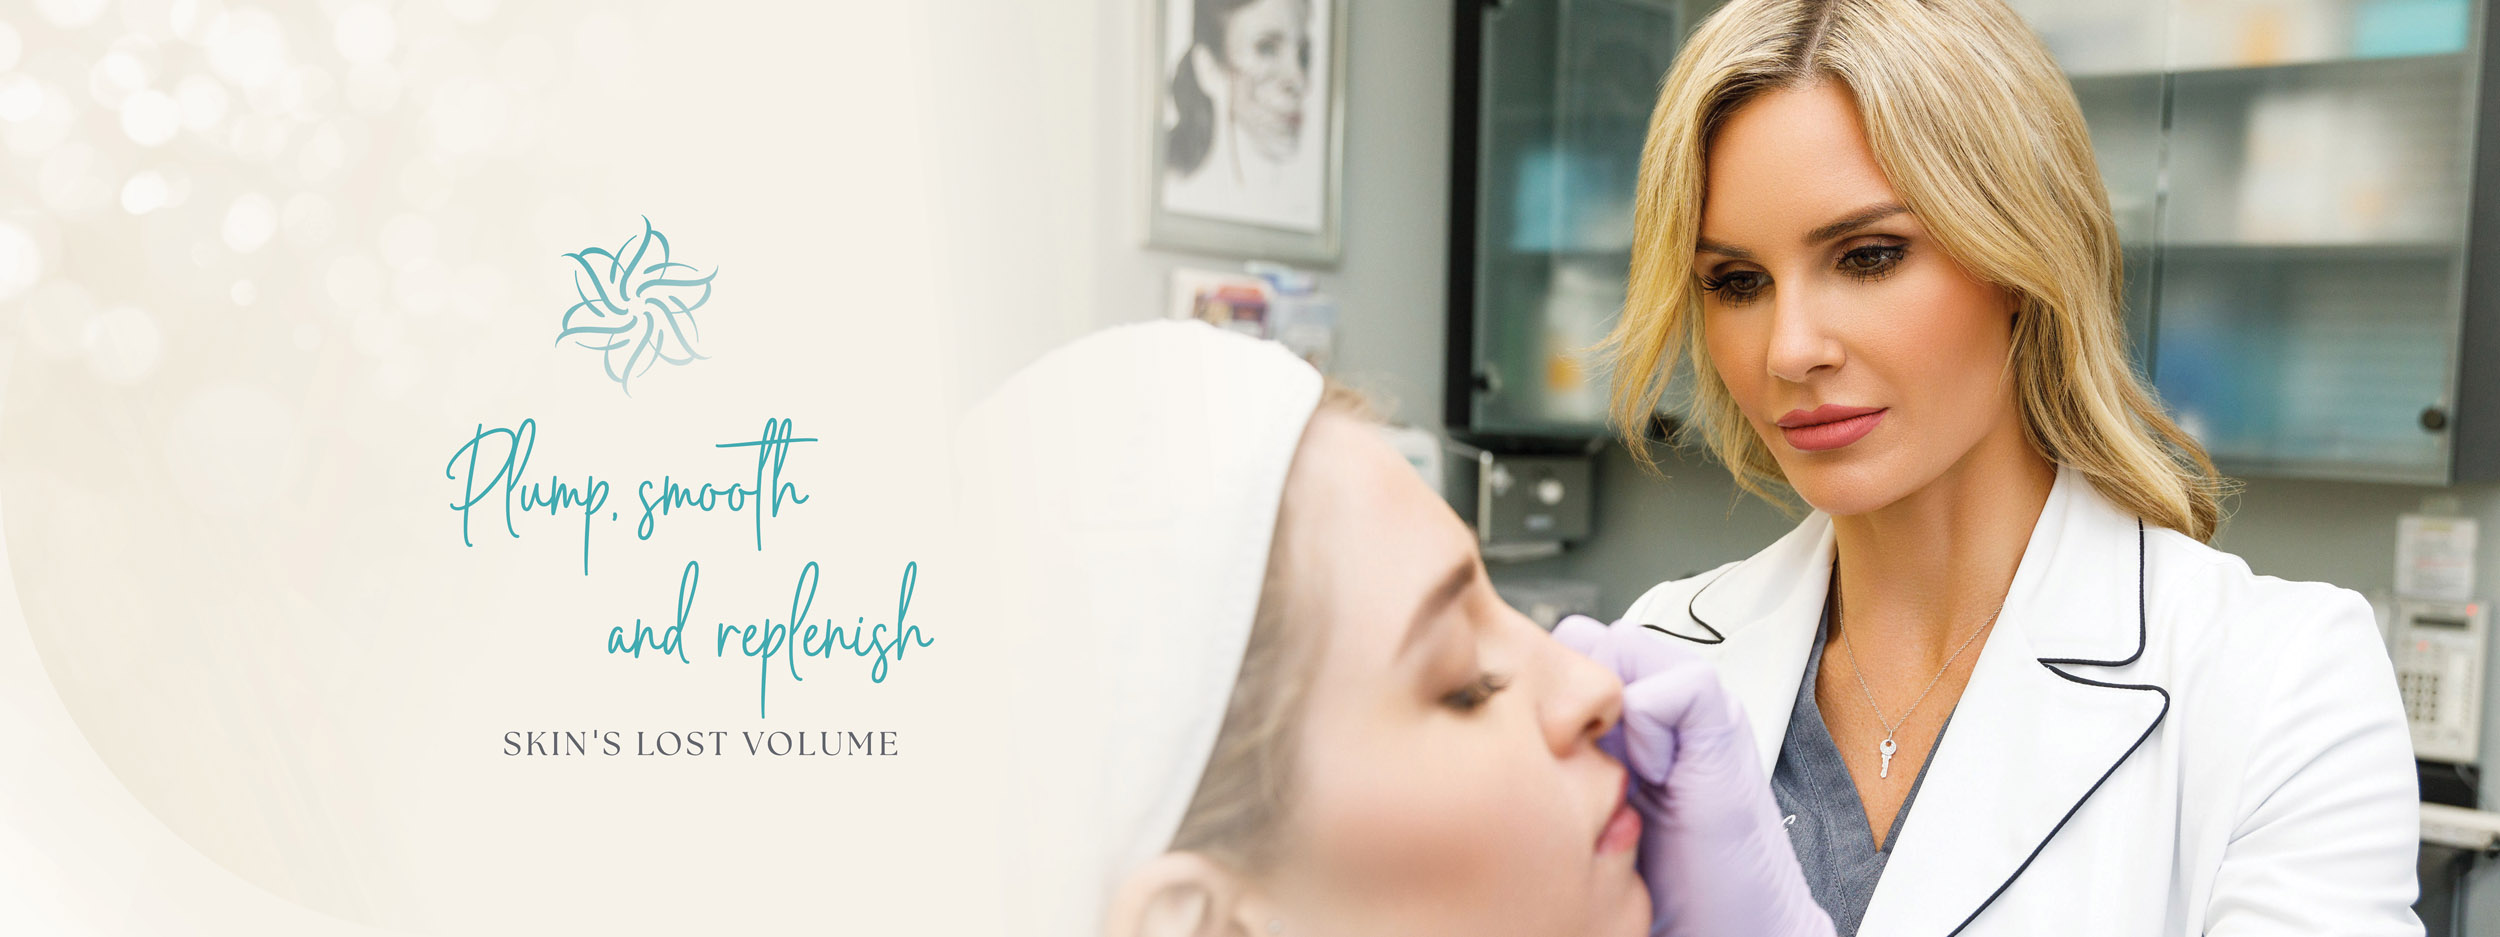 Dermal Fillers from Refresh Aesthetic Center in Whitefish Bay WI